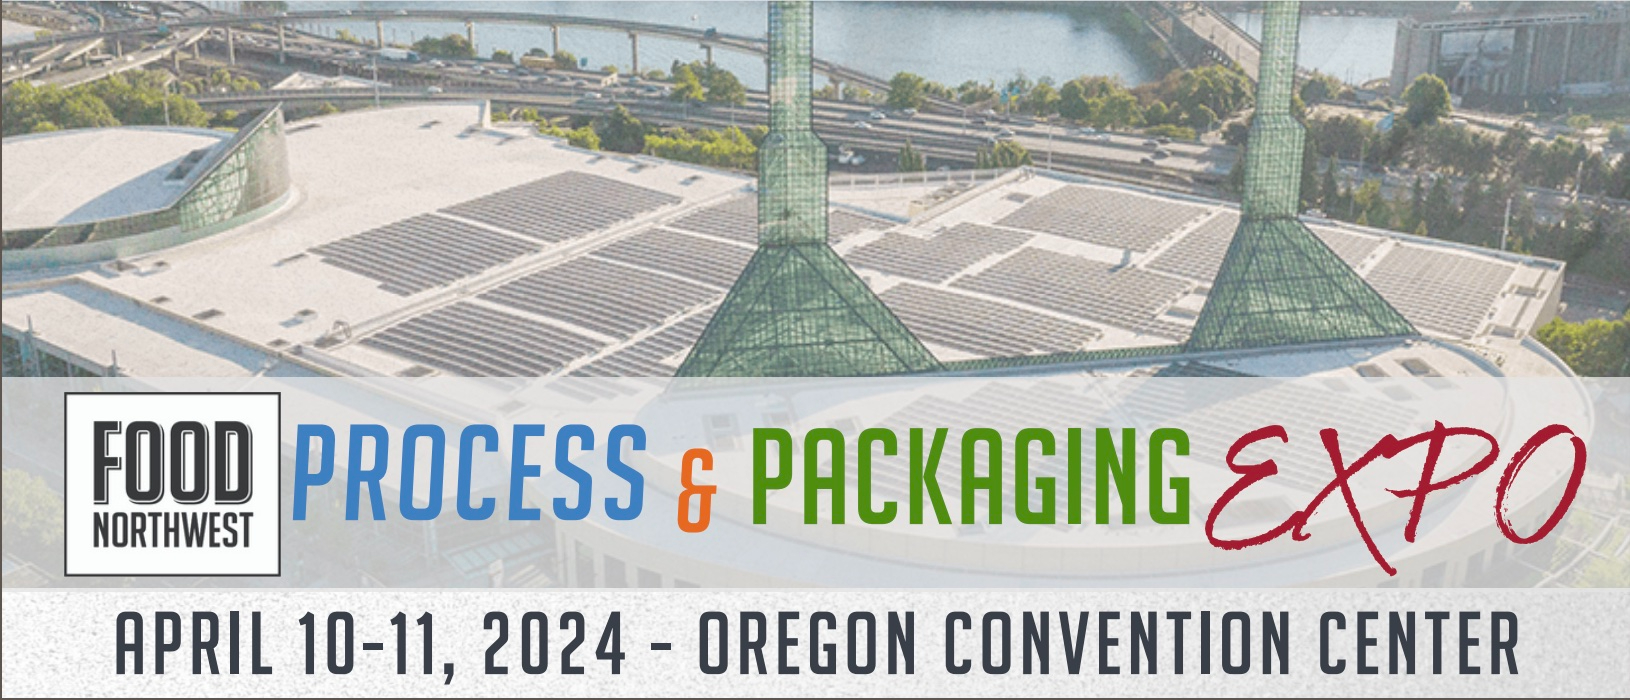 2024 Food Northwest Process & Packaging Expo